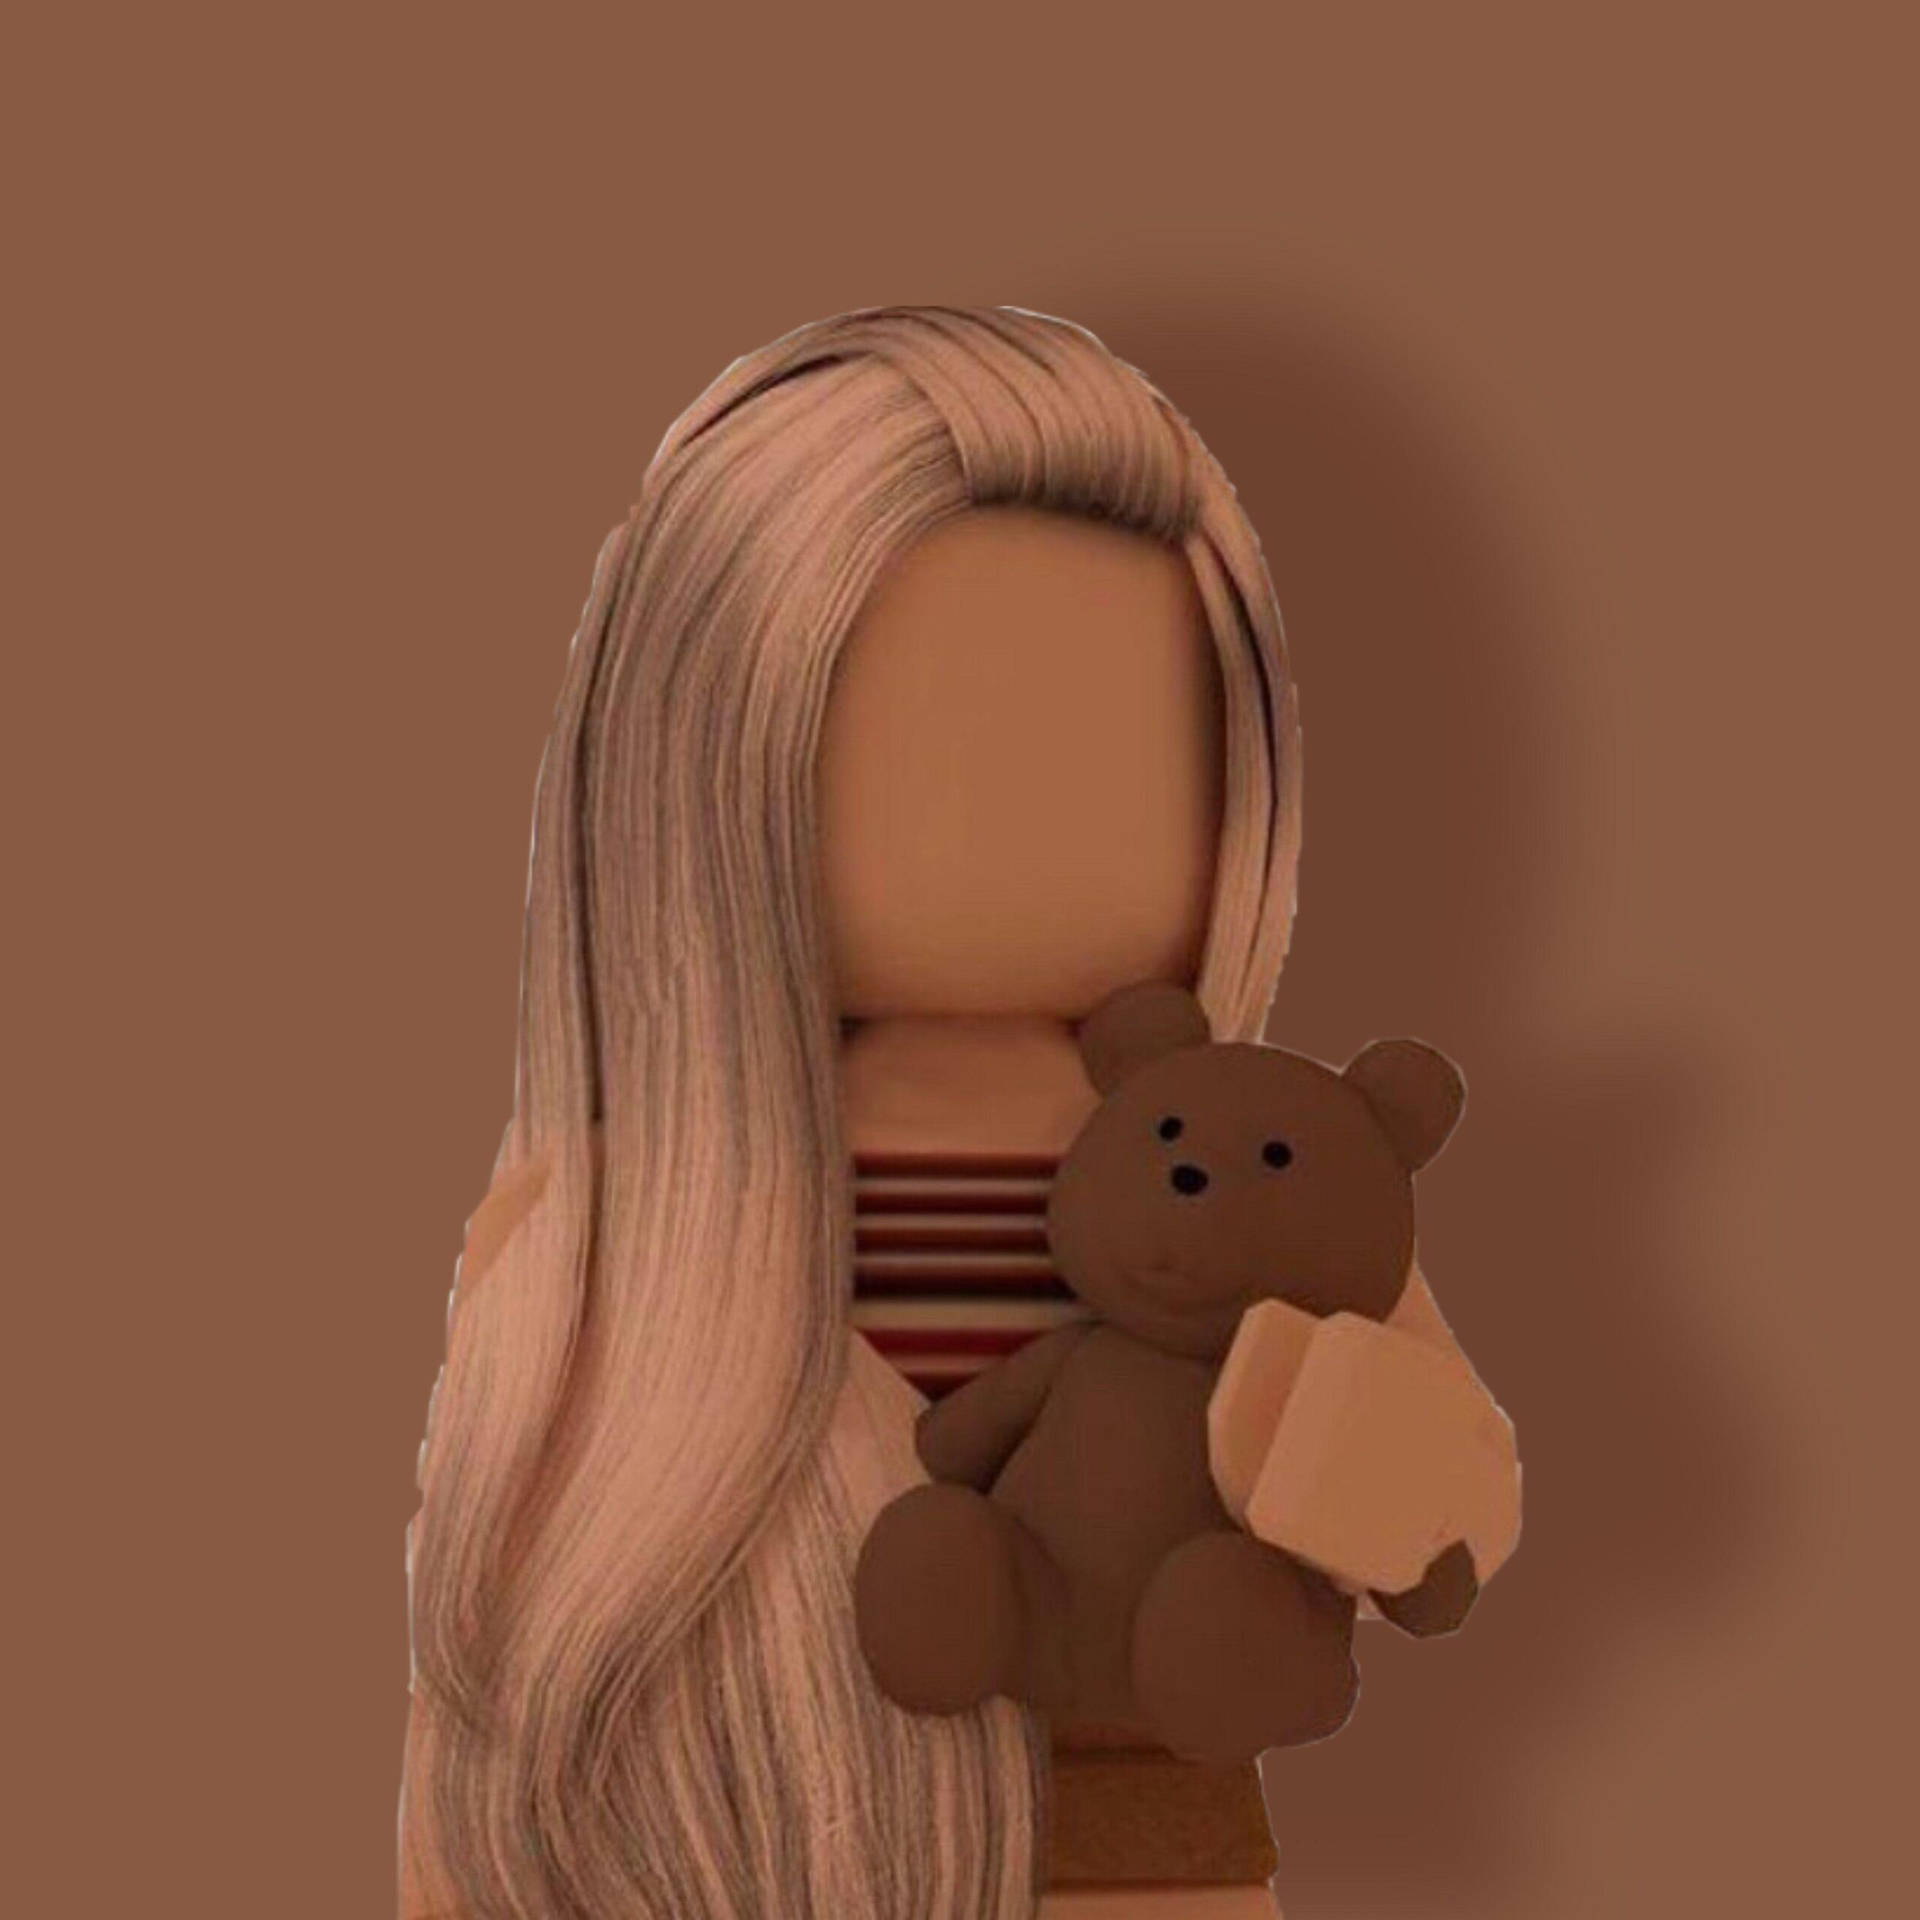 Roblox Aesthetic Girl With A Bear Wallpaper